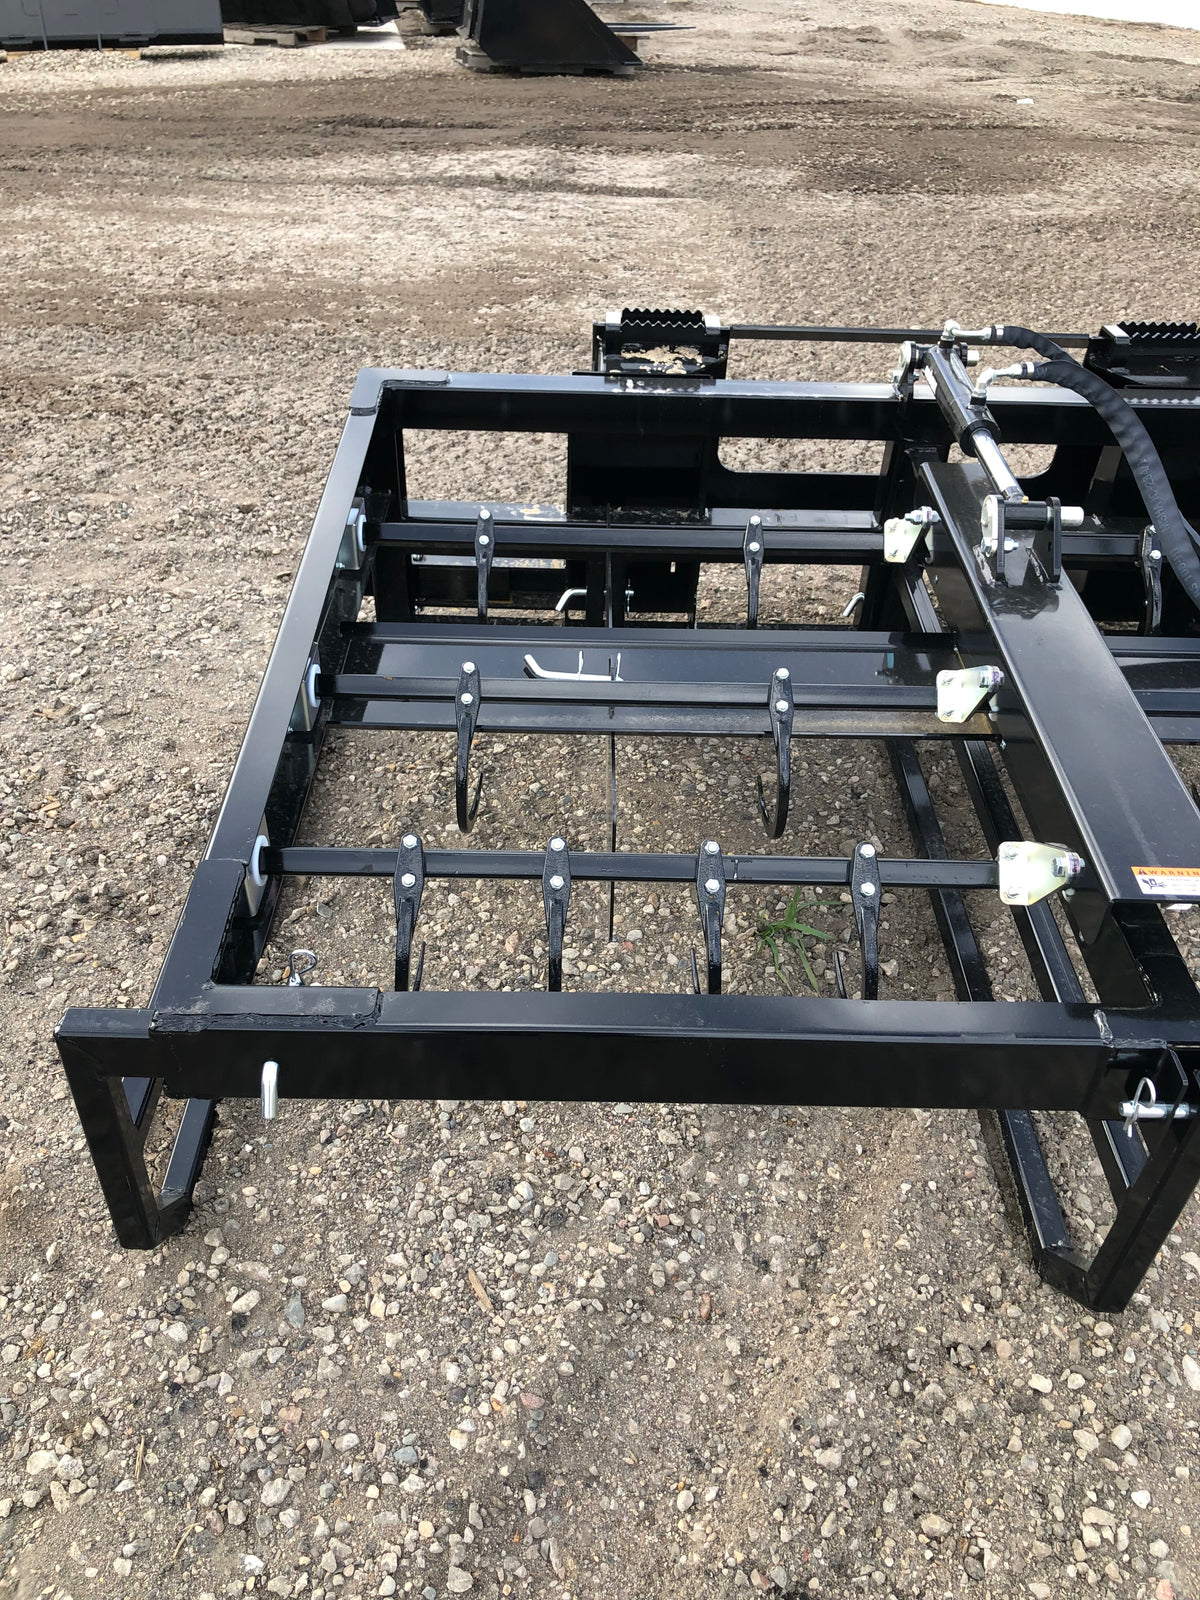 6-Pack Bale Accumulator Grapple | Top Dog Attachments